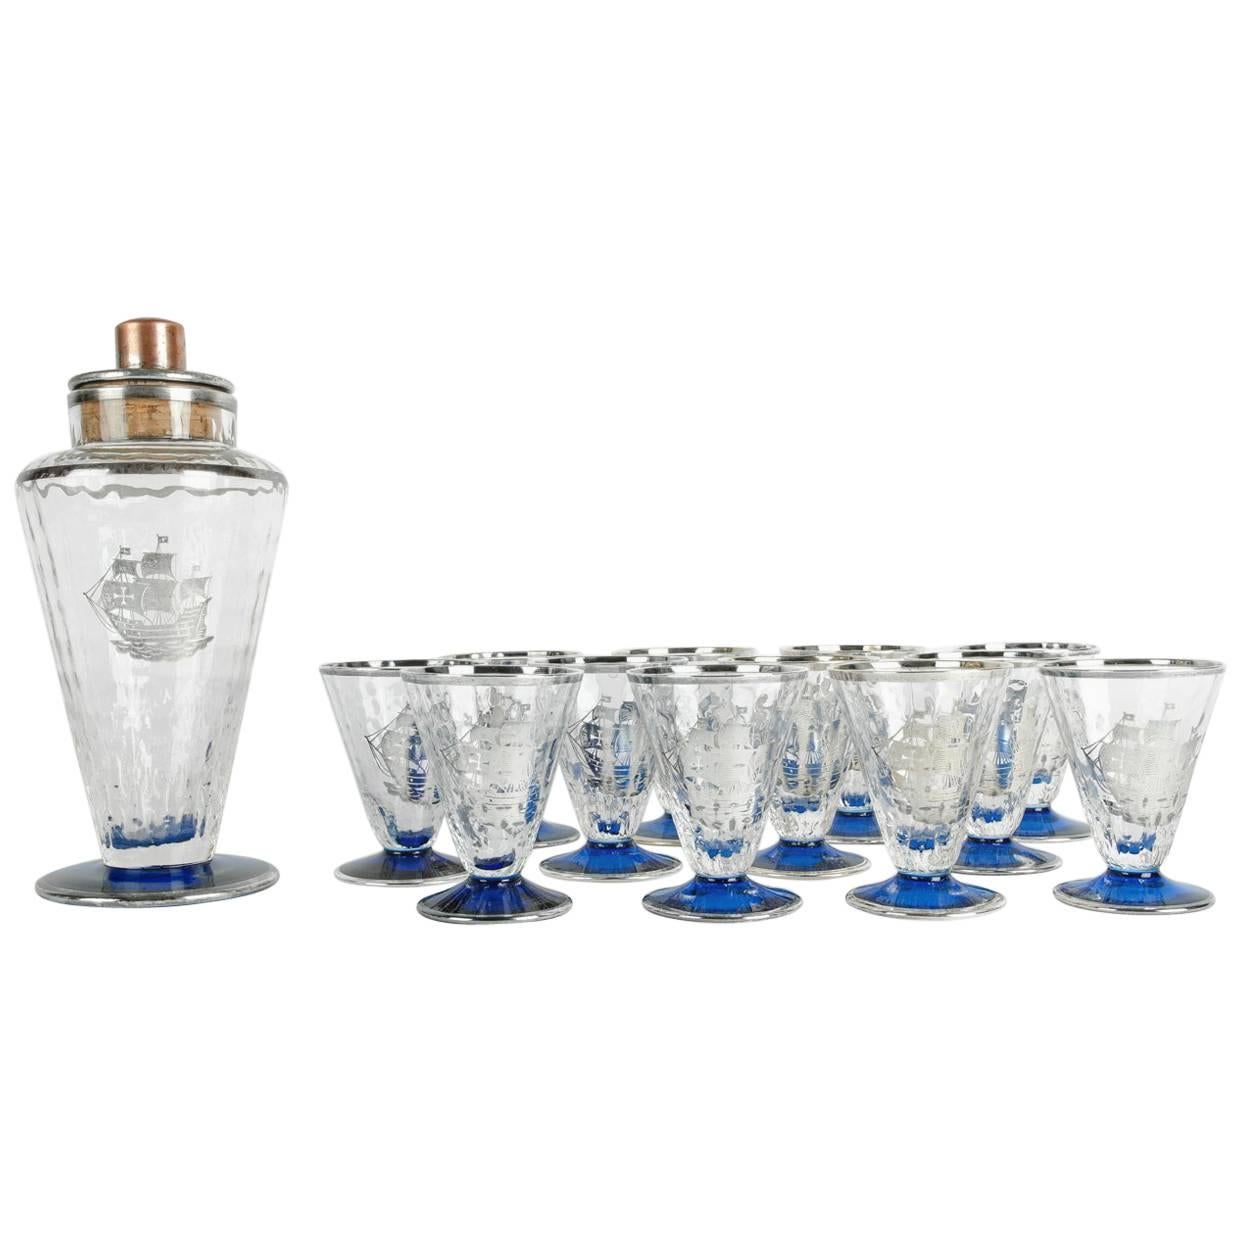 Antique Martini / Cocktail Shaker Set with Sterling Inlaid Ship Design